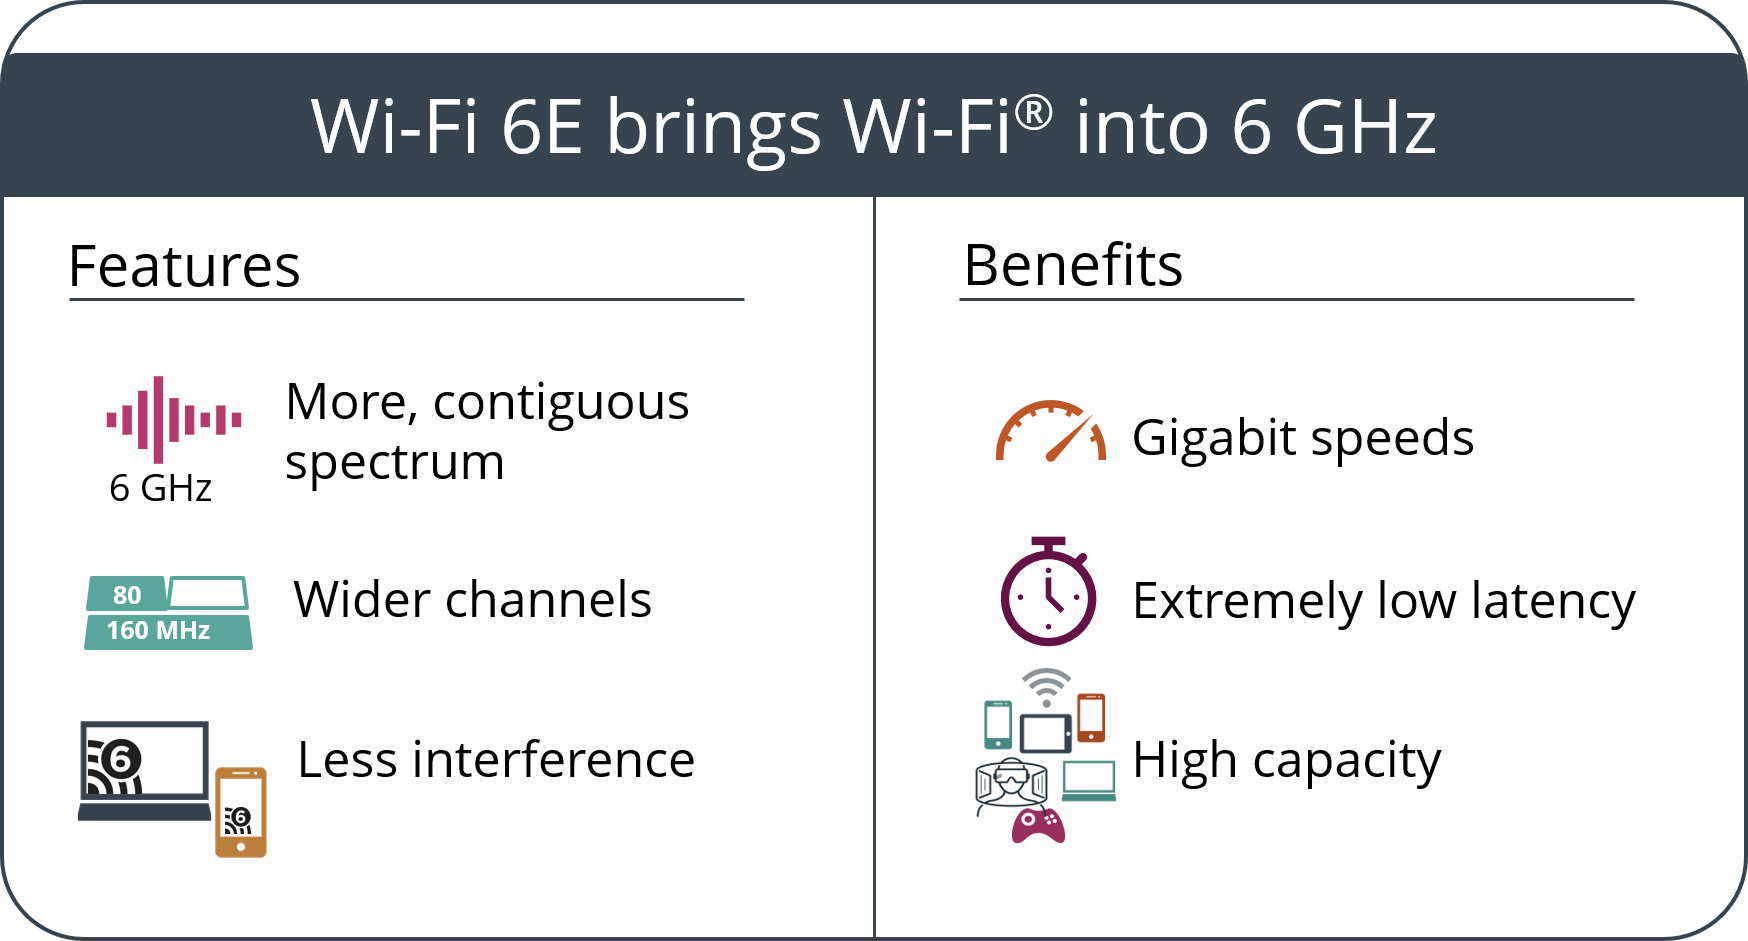 Wi-Fi 6 - what's different about the new standard